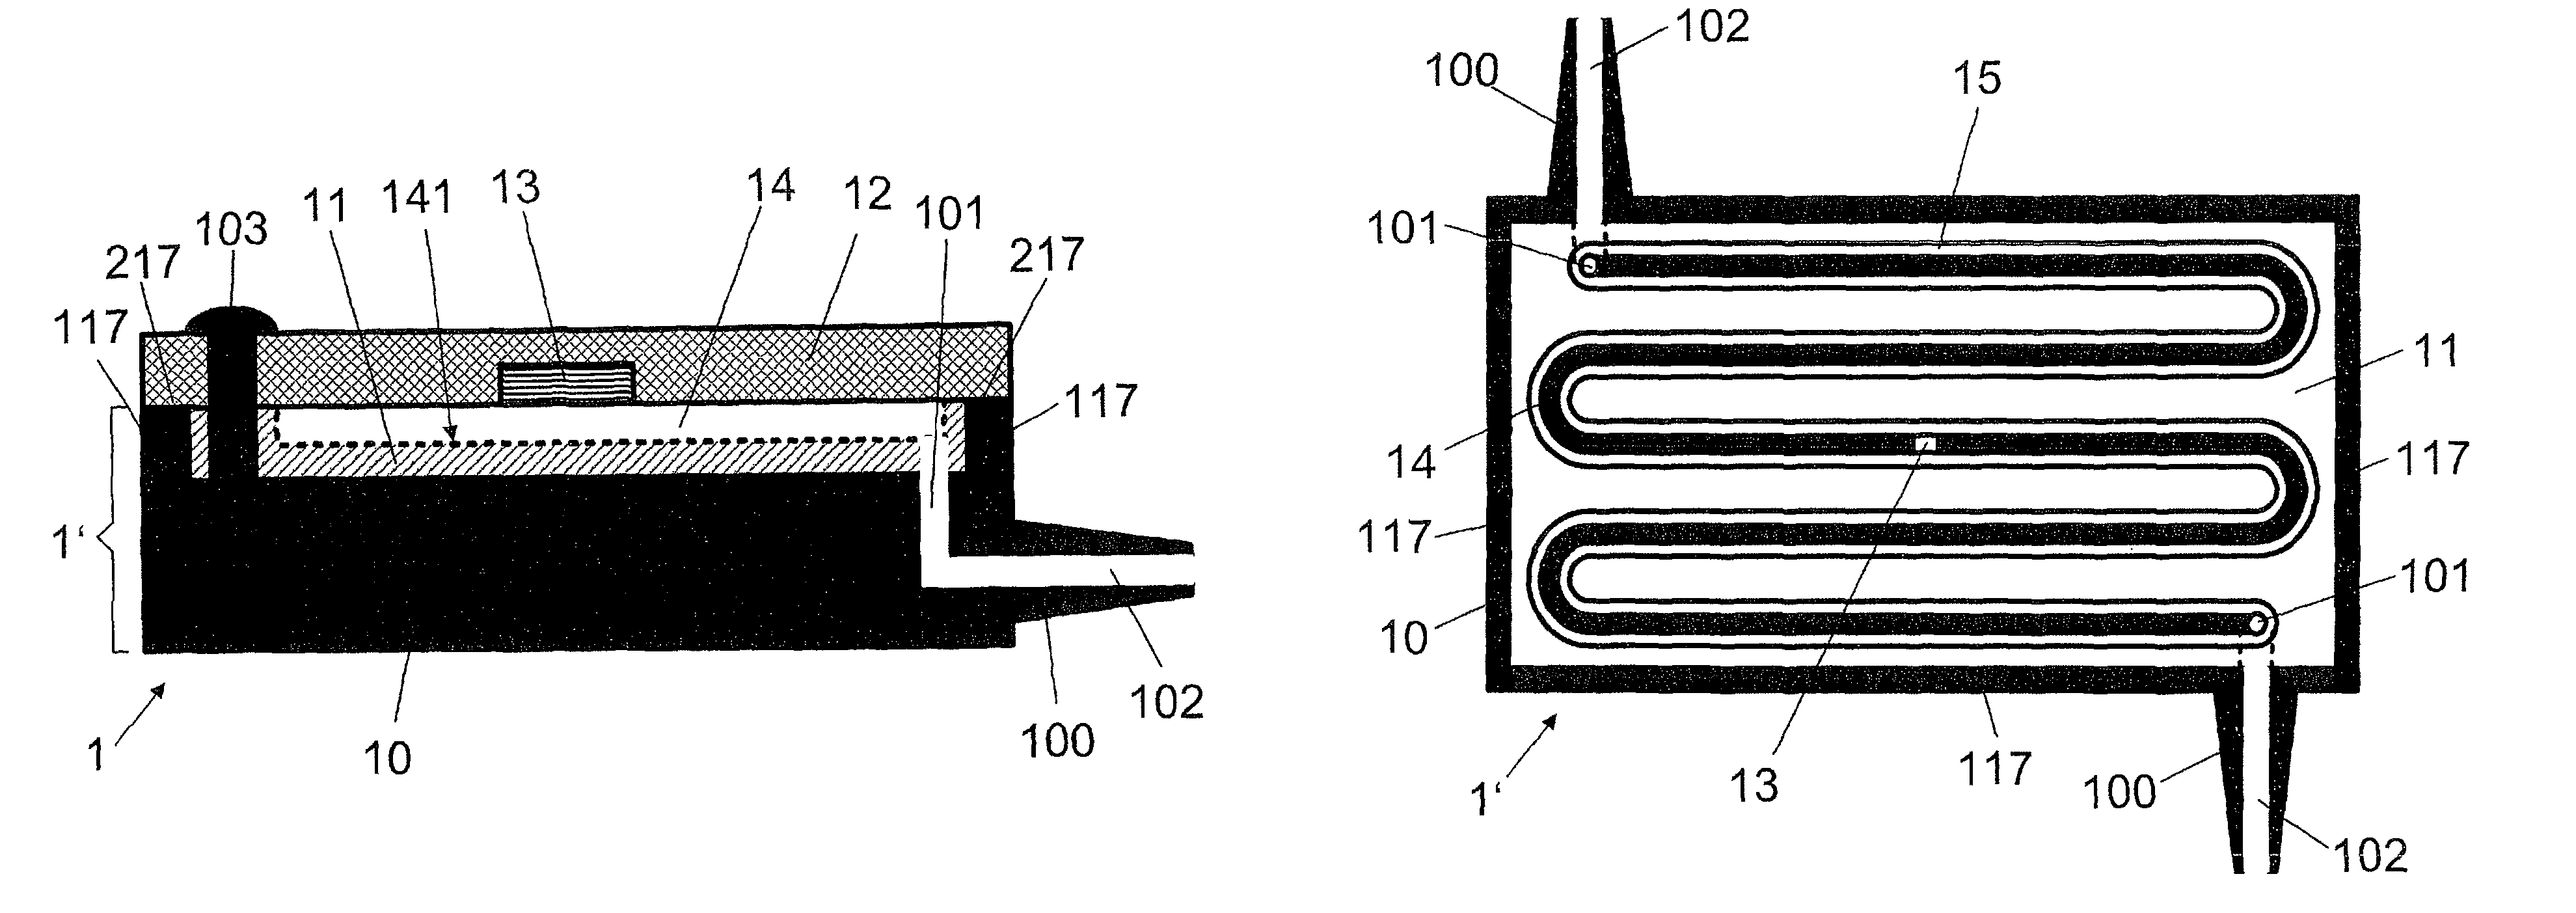 Flow sensor including a base member with a resilient region forming a flow channel and a cover member covering the flow channel